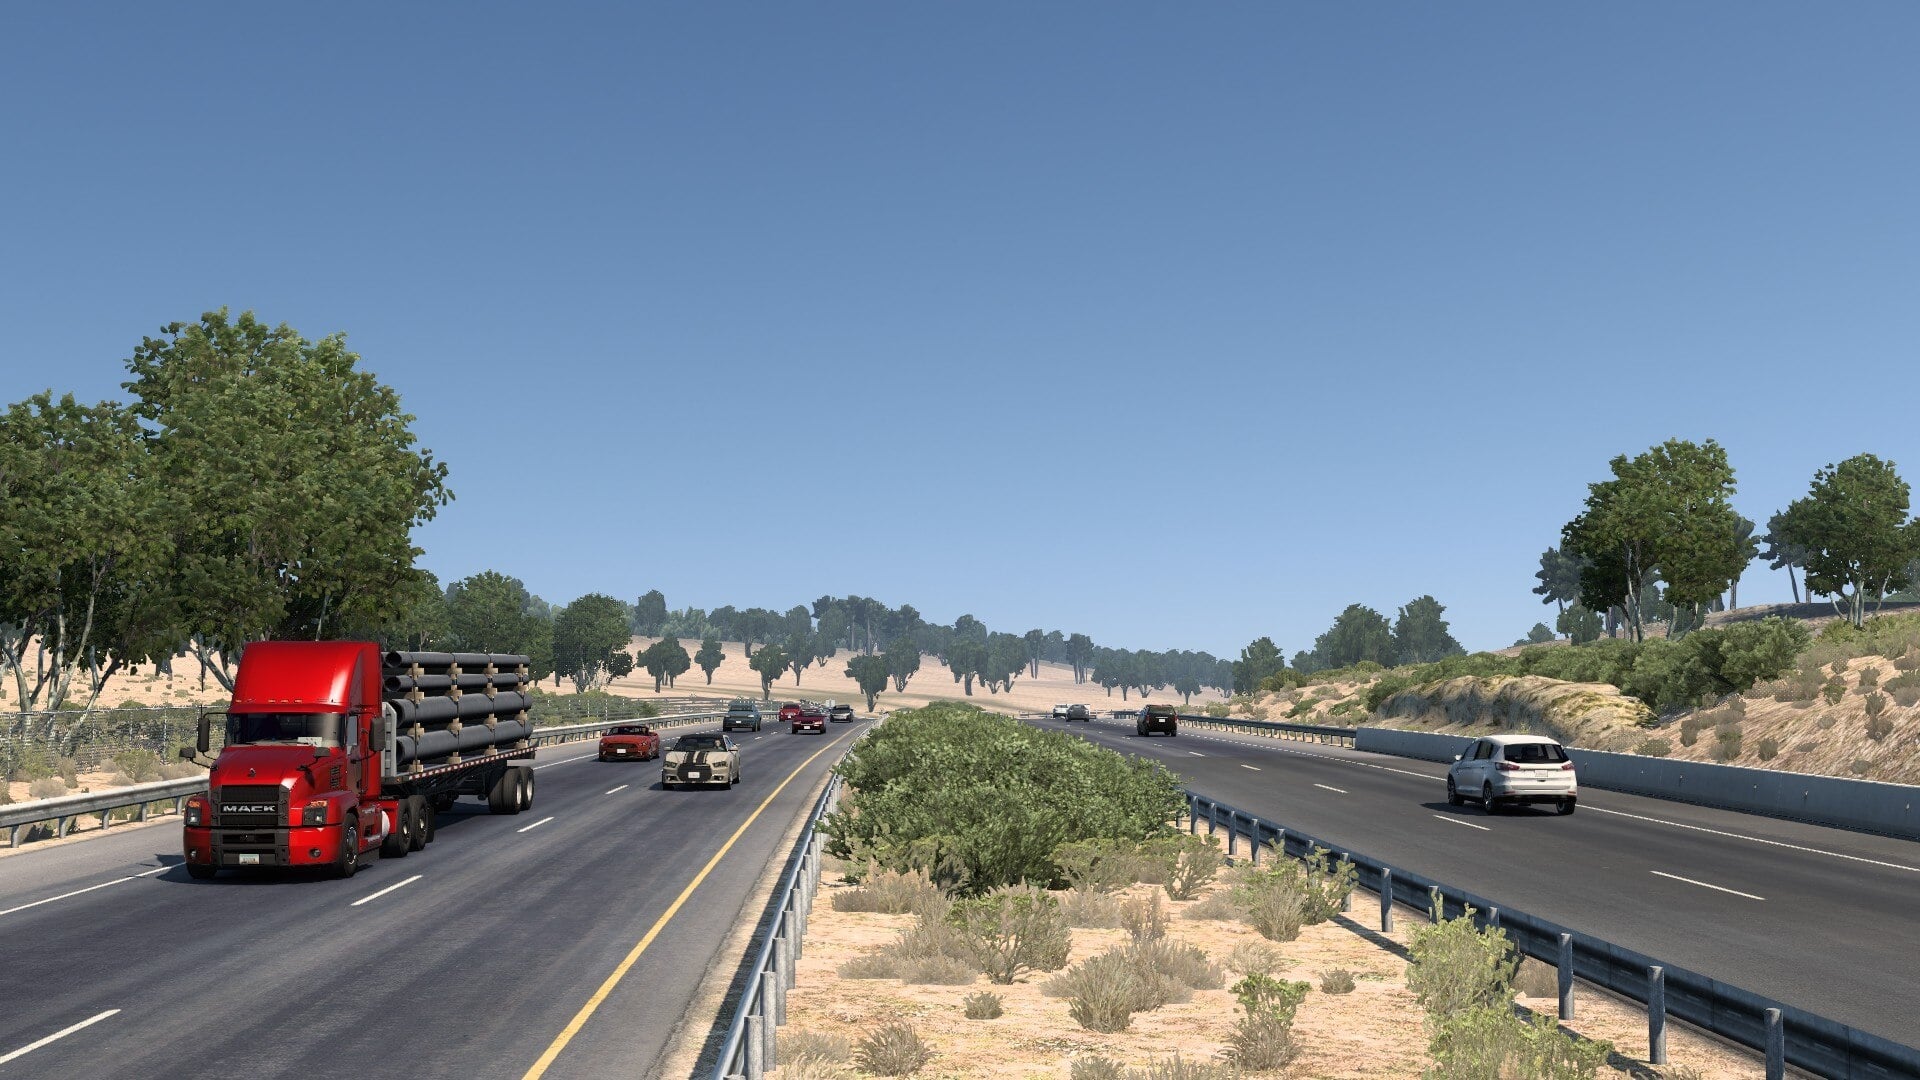 how to use steam workshop mods on american truck simulator